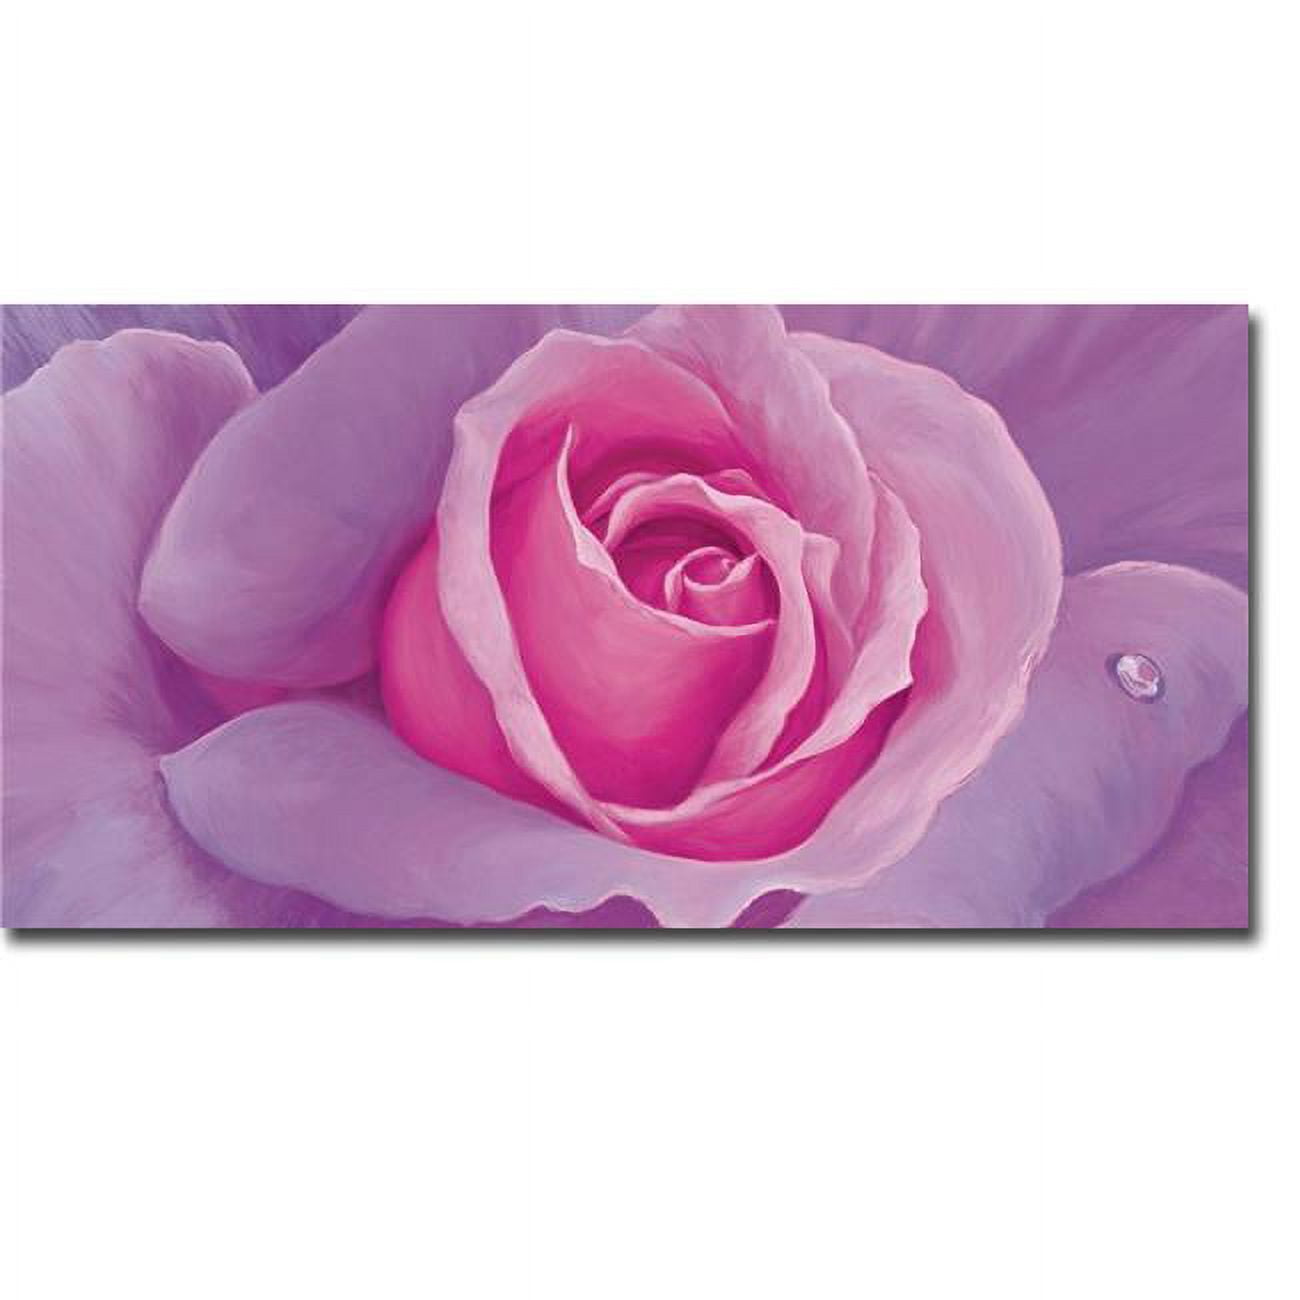 1224567tg La Vie En Rose - Life In Pink By Sara Cortese Premium Gallery-wrapped Canvas Giclee Art - Ready To Hang, 12 X 24 In.